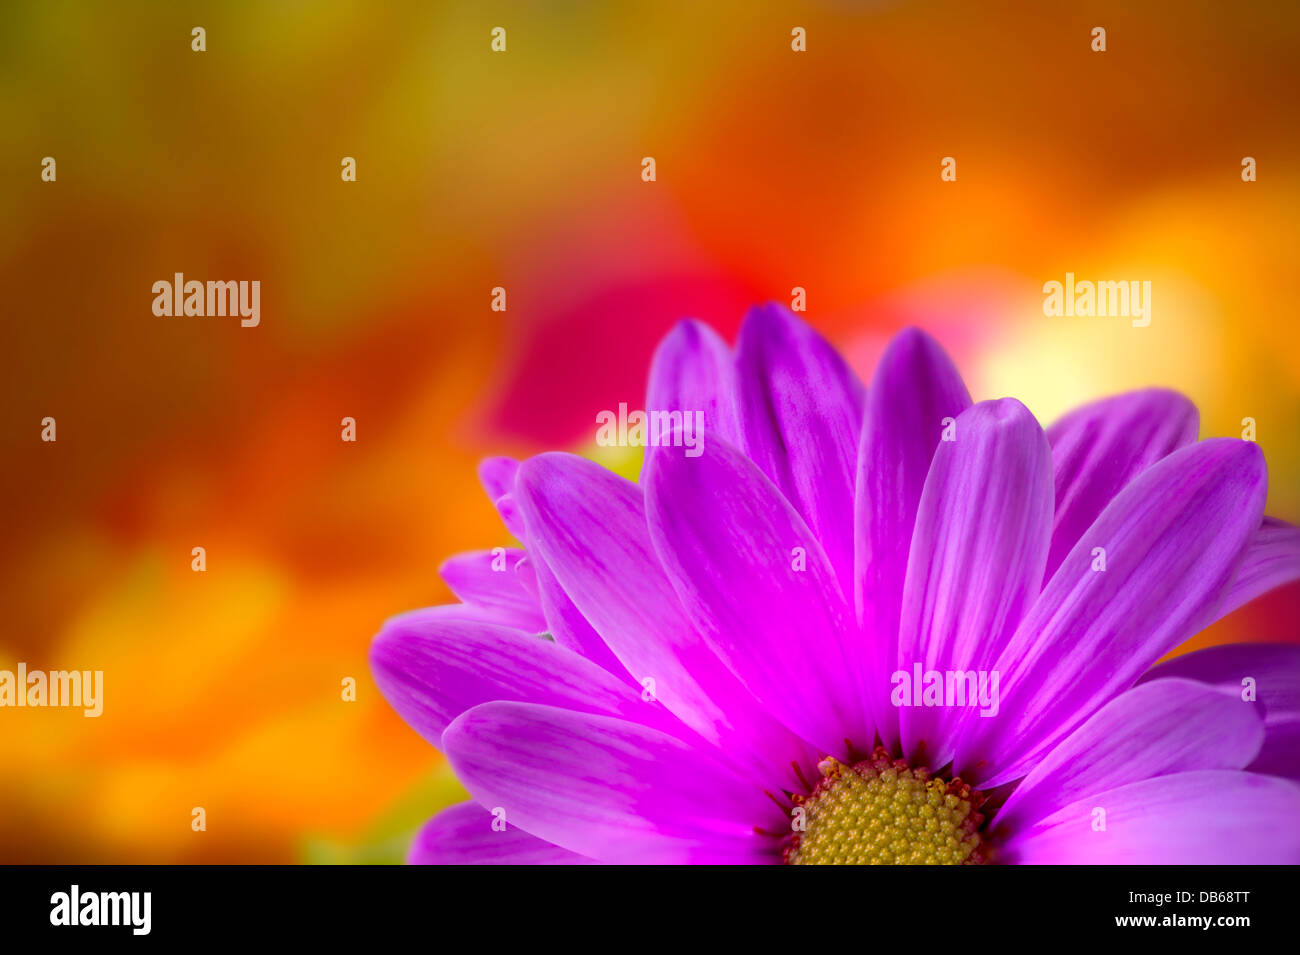 Colorful Purple Flower Withe Yellow & Orange Flowers Out Of Focus In Background Stock Photo